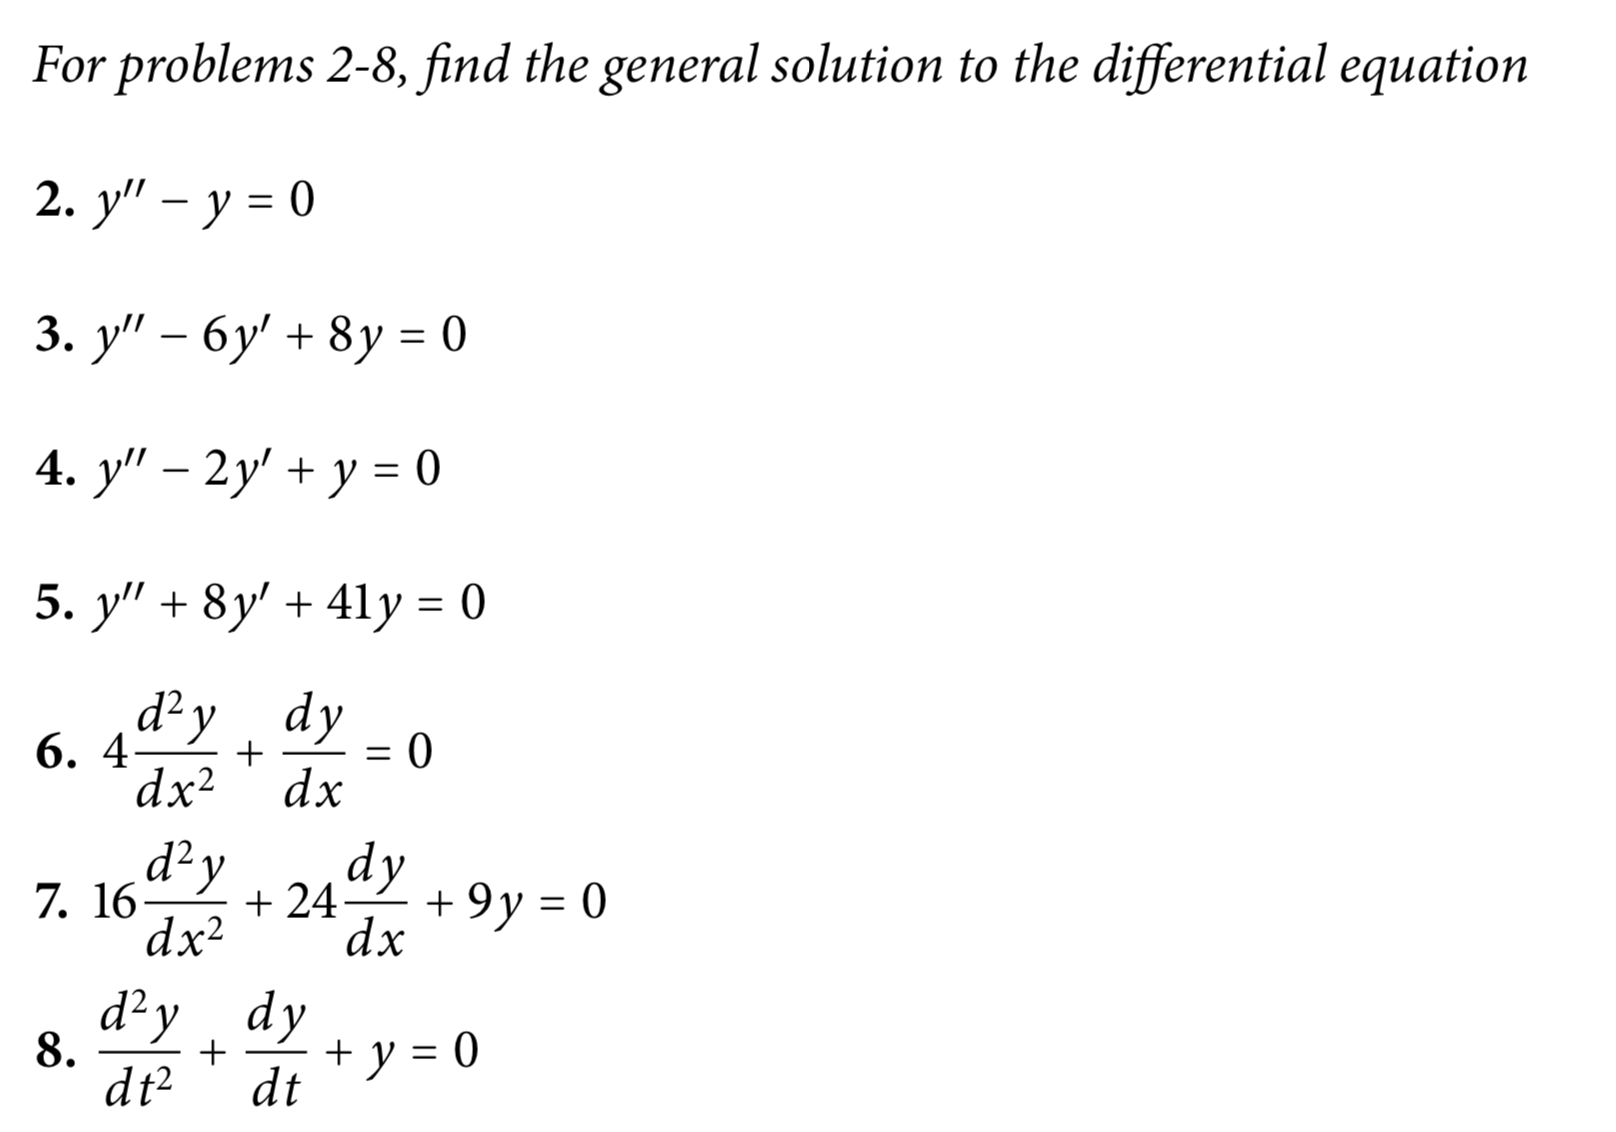 For problems 2-8, find the general solution to the differential equation
2. y" – y = 0
3. у" - бу' + 8у %3D0
4. y" – 2y' + y = 0
5. y" + 8y' + 41y = 0
d²y, dy
6. 4.
dx2
dx
d²y
dy
7. 16
+ 24-
+ 9y = 0
dx?
dx
d²y dy
8.
dt²
+ y = 0
dt
